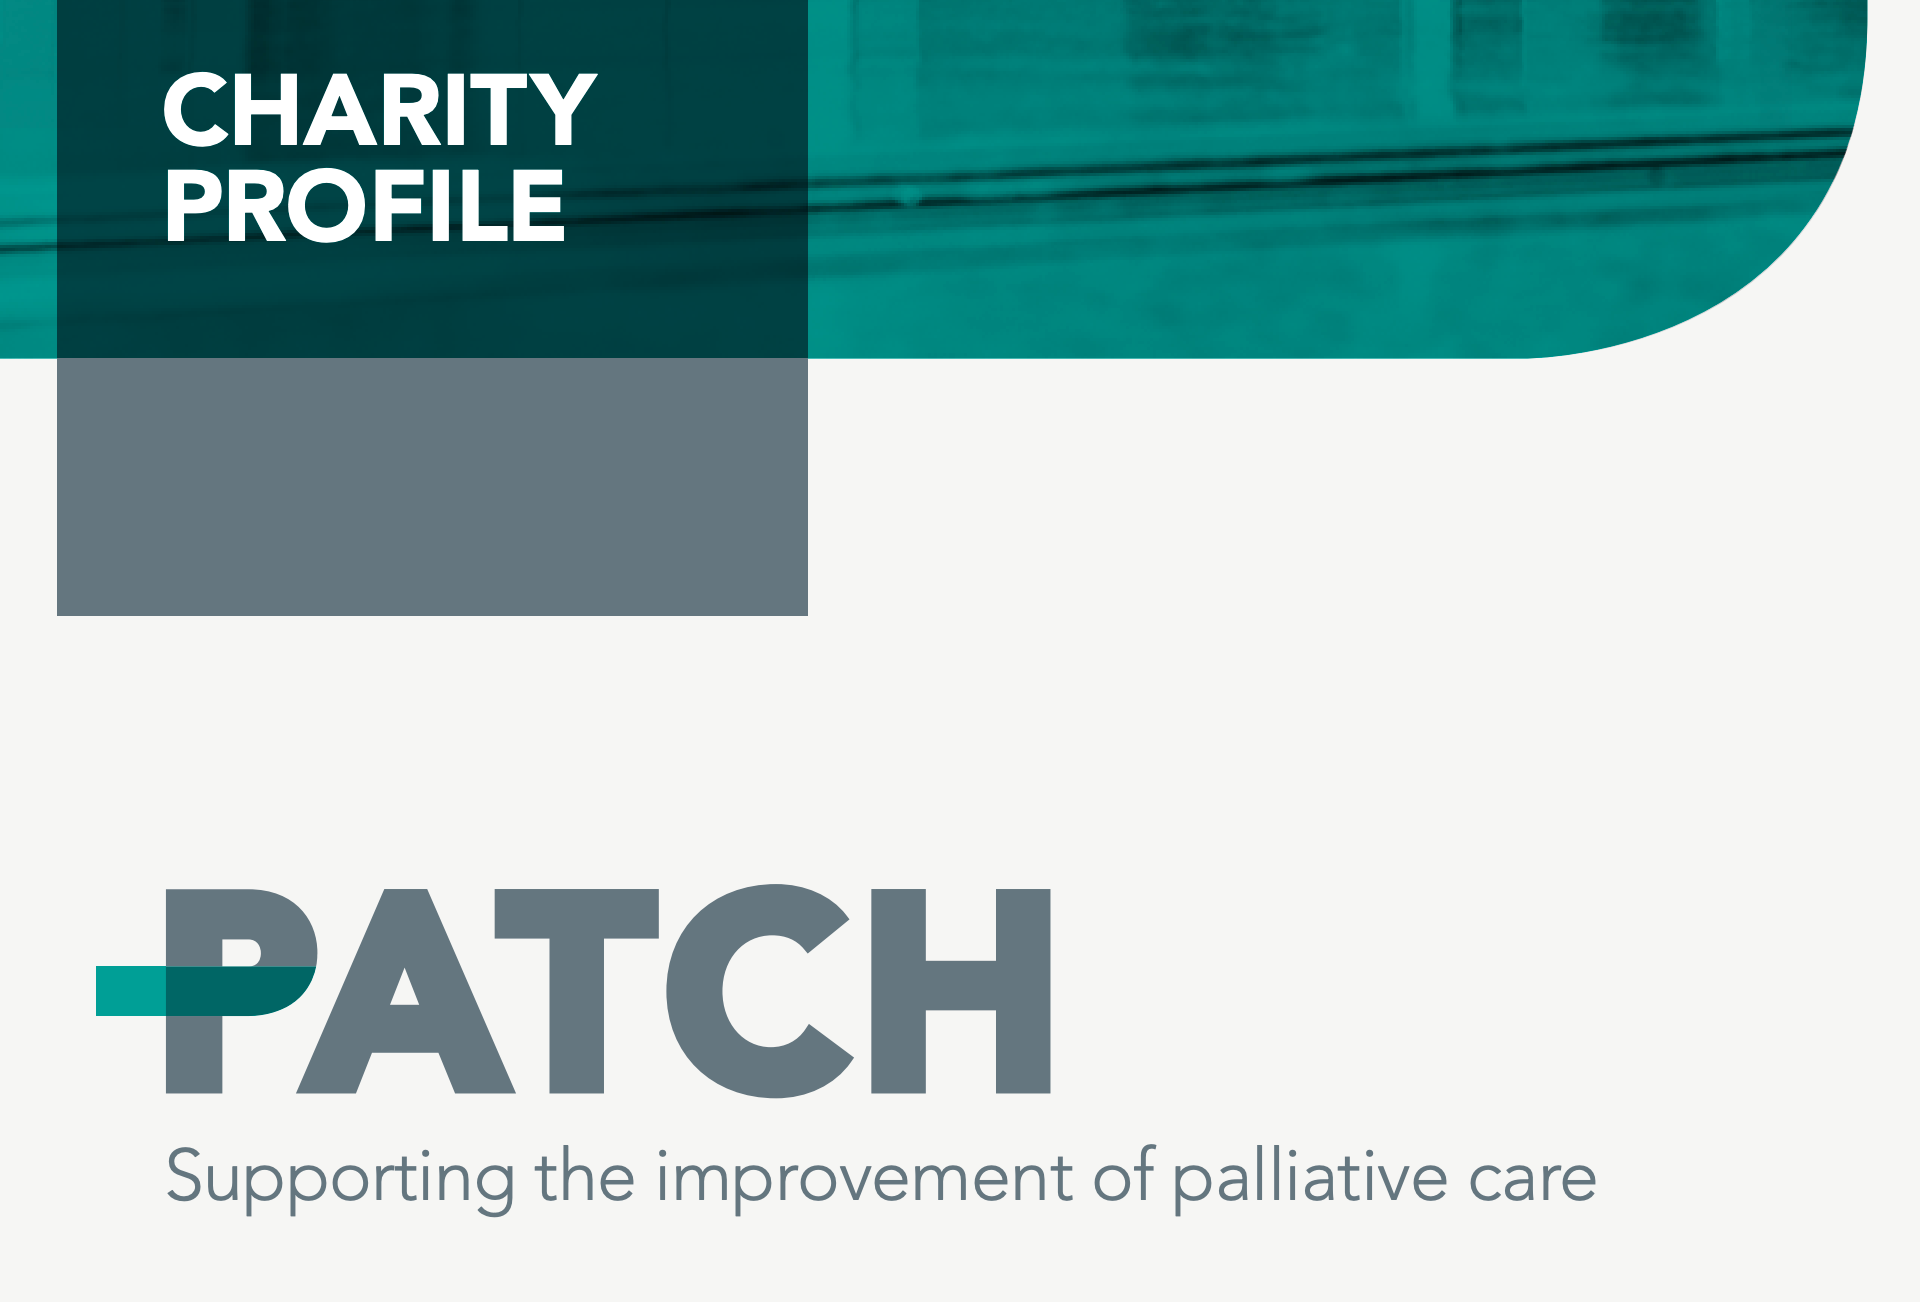 PATCH Charity Profile cover